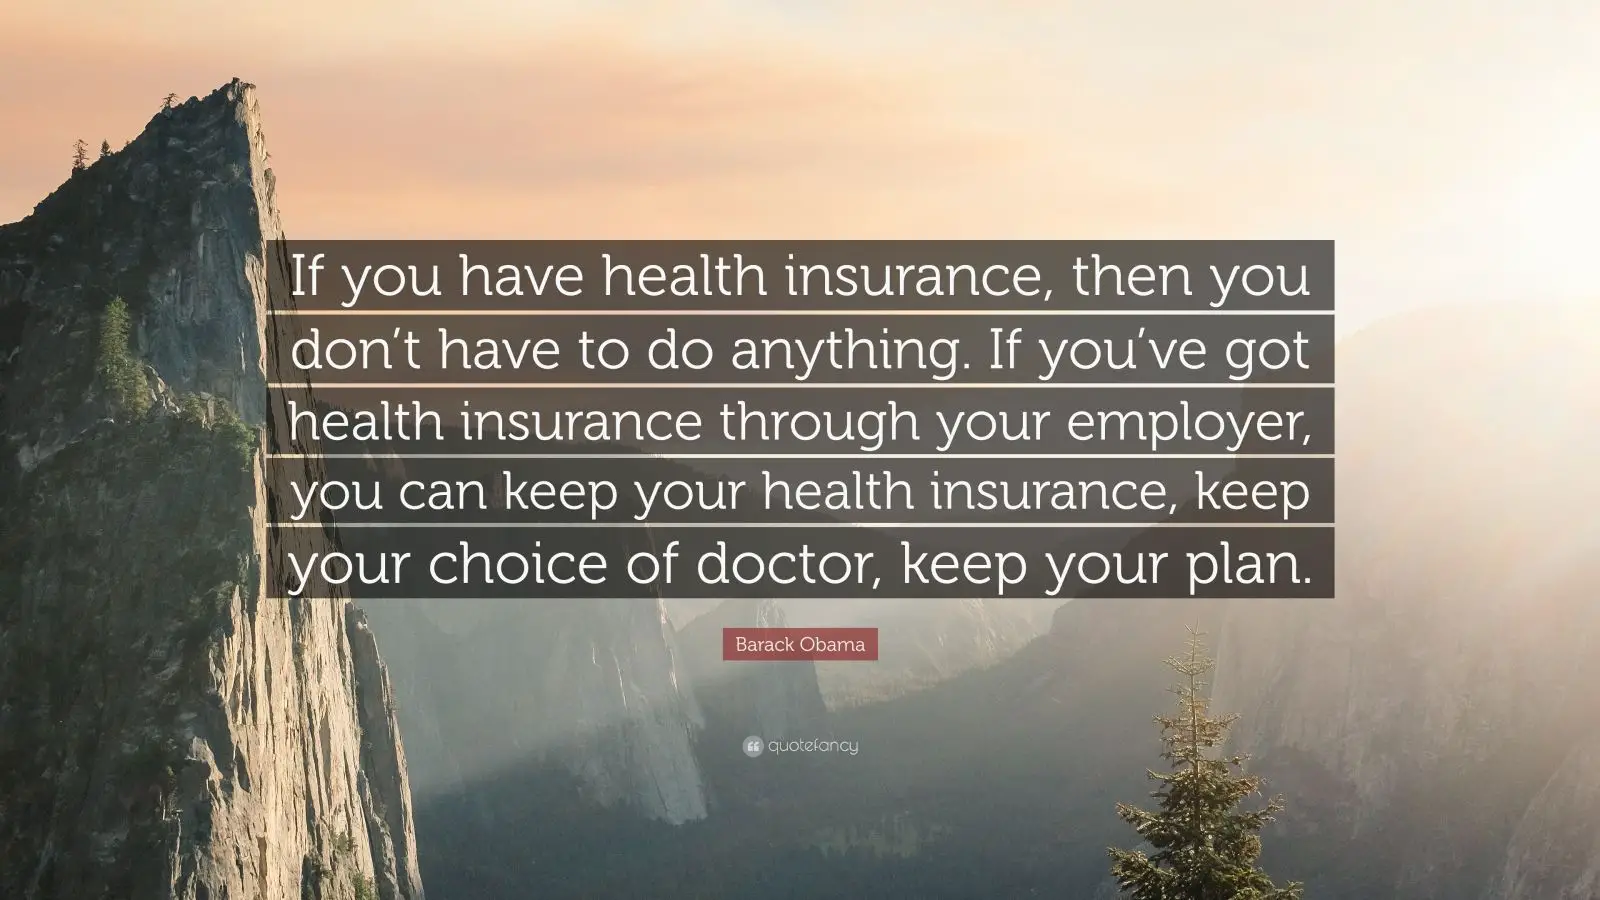 Barack Obama Quote: If you have health insurance, then ...